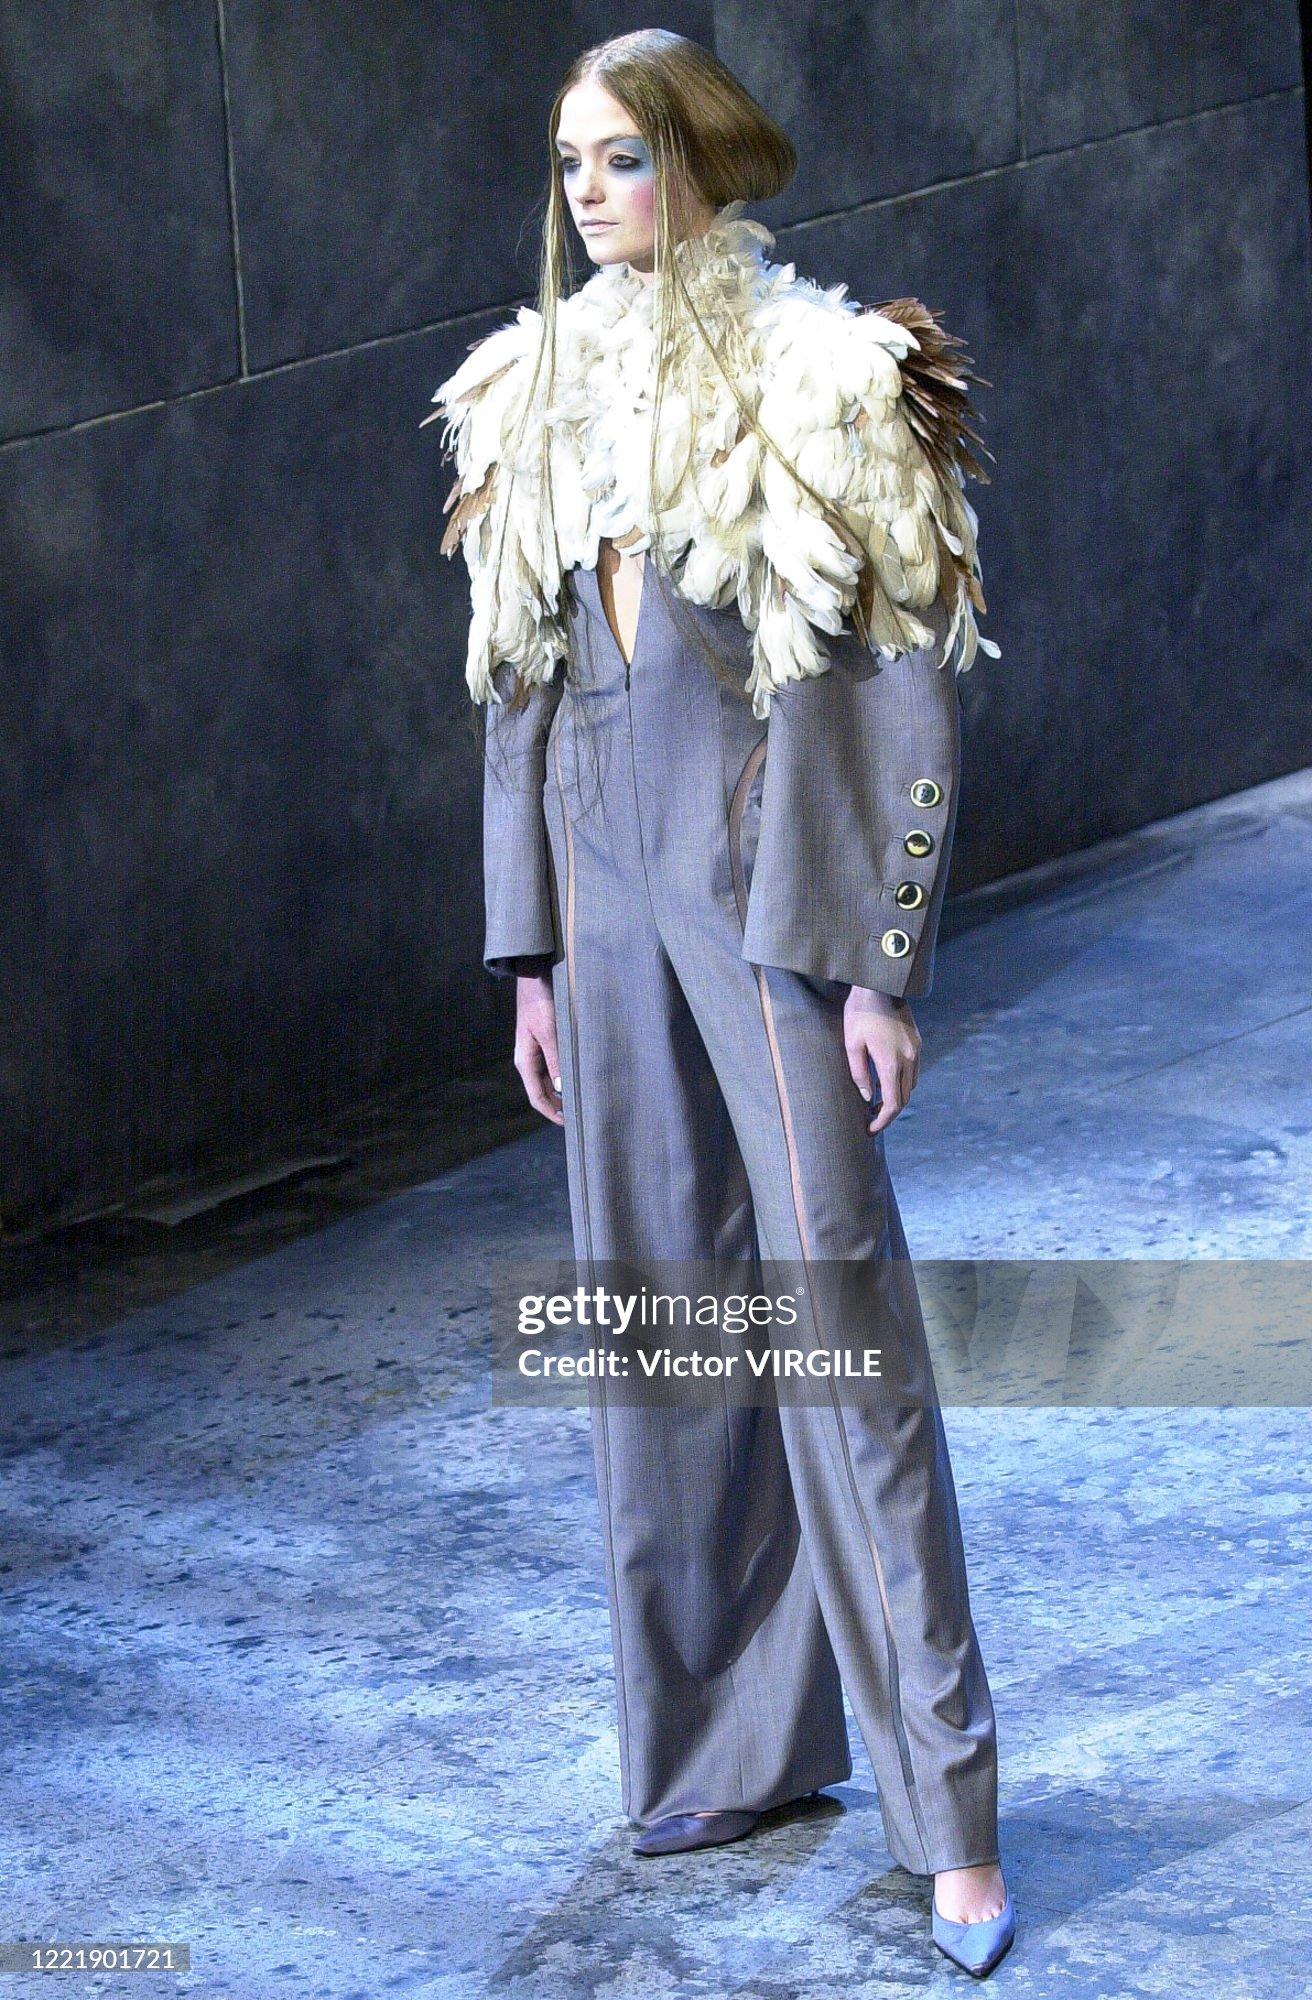 Givenchy Haute Couture 
by Alexander McQueen
Spring 2000 - very similar version seen on the runway. Our one is made to order for a customer, so very likely to be one of a kind.

Grey lightweight wool jumpsuit with mesh inserts
Deep V neckline with